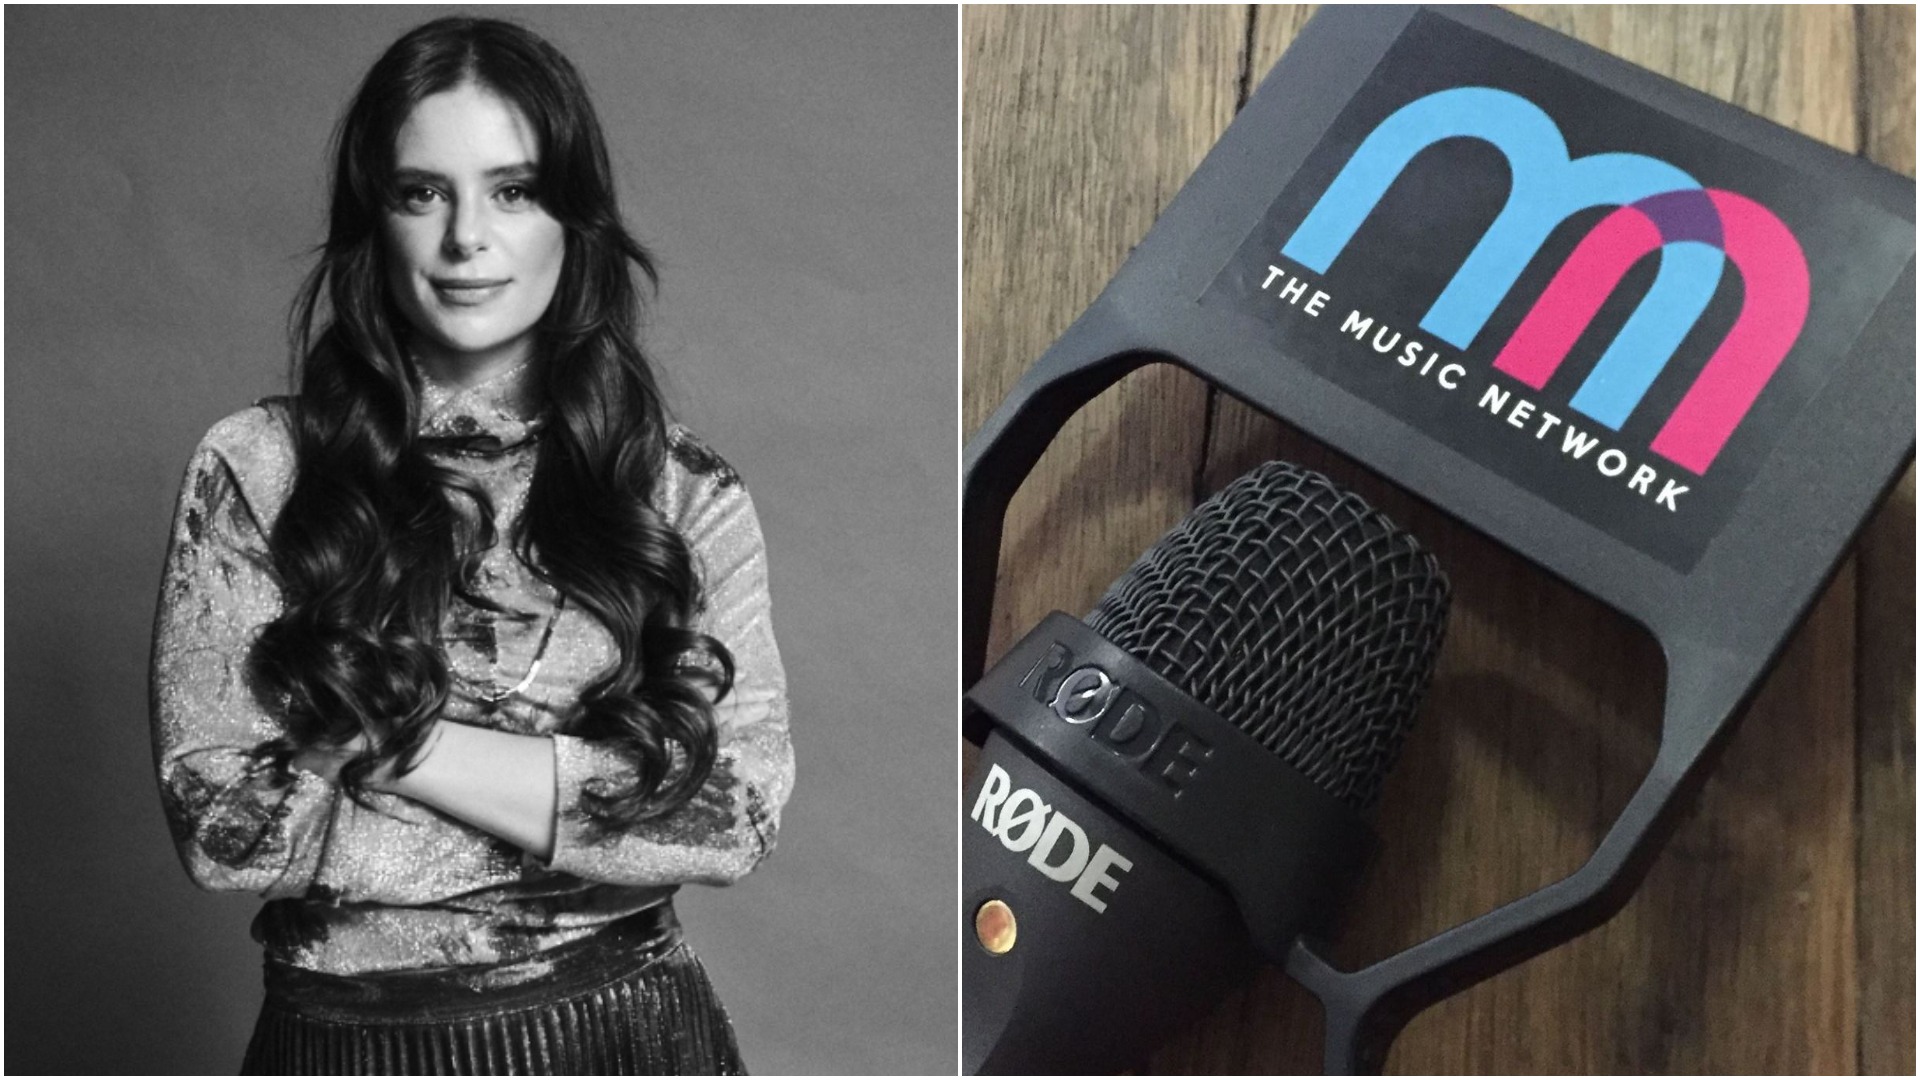 The Brag Media acquires The Music Network, promotes Poppy Reid to Editor in Chief